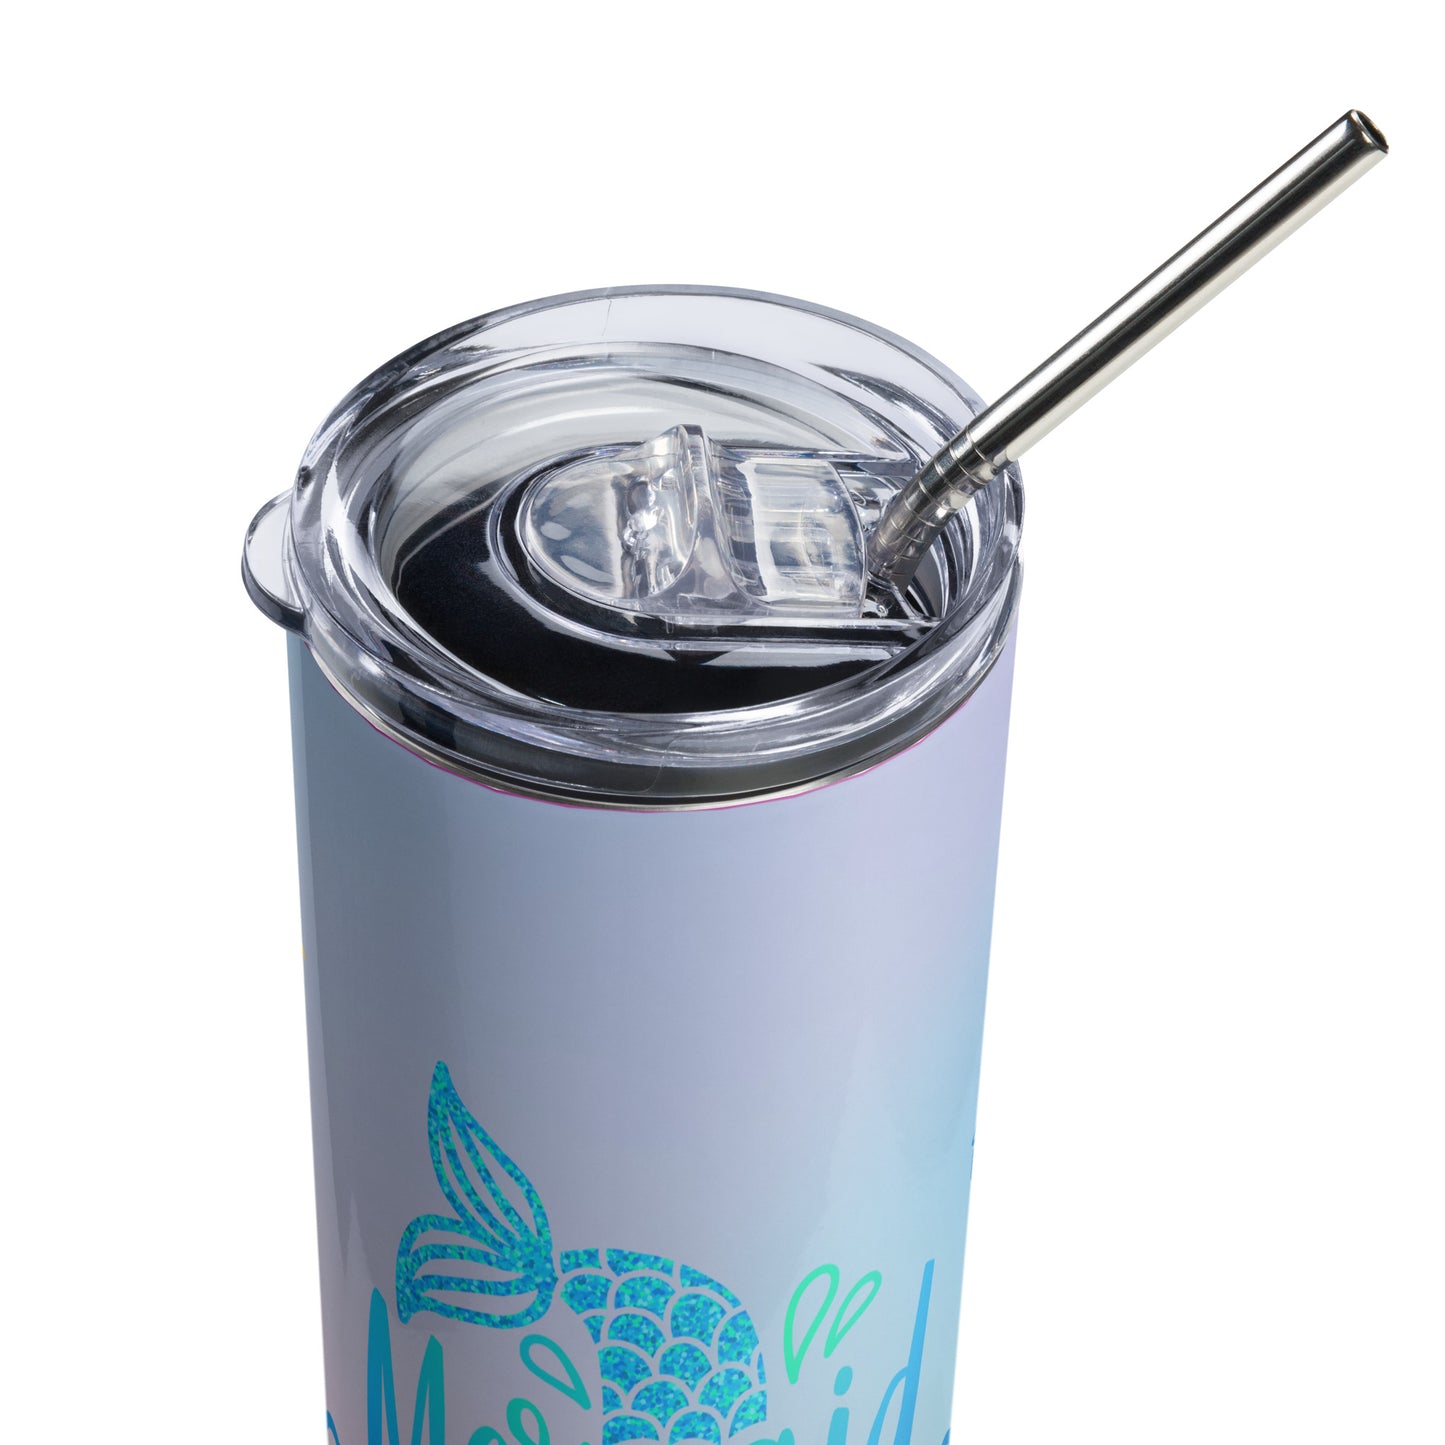 On the Go with Princess O Mermaid Vibes Drink Tumbler